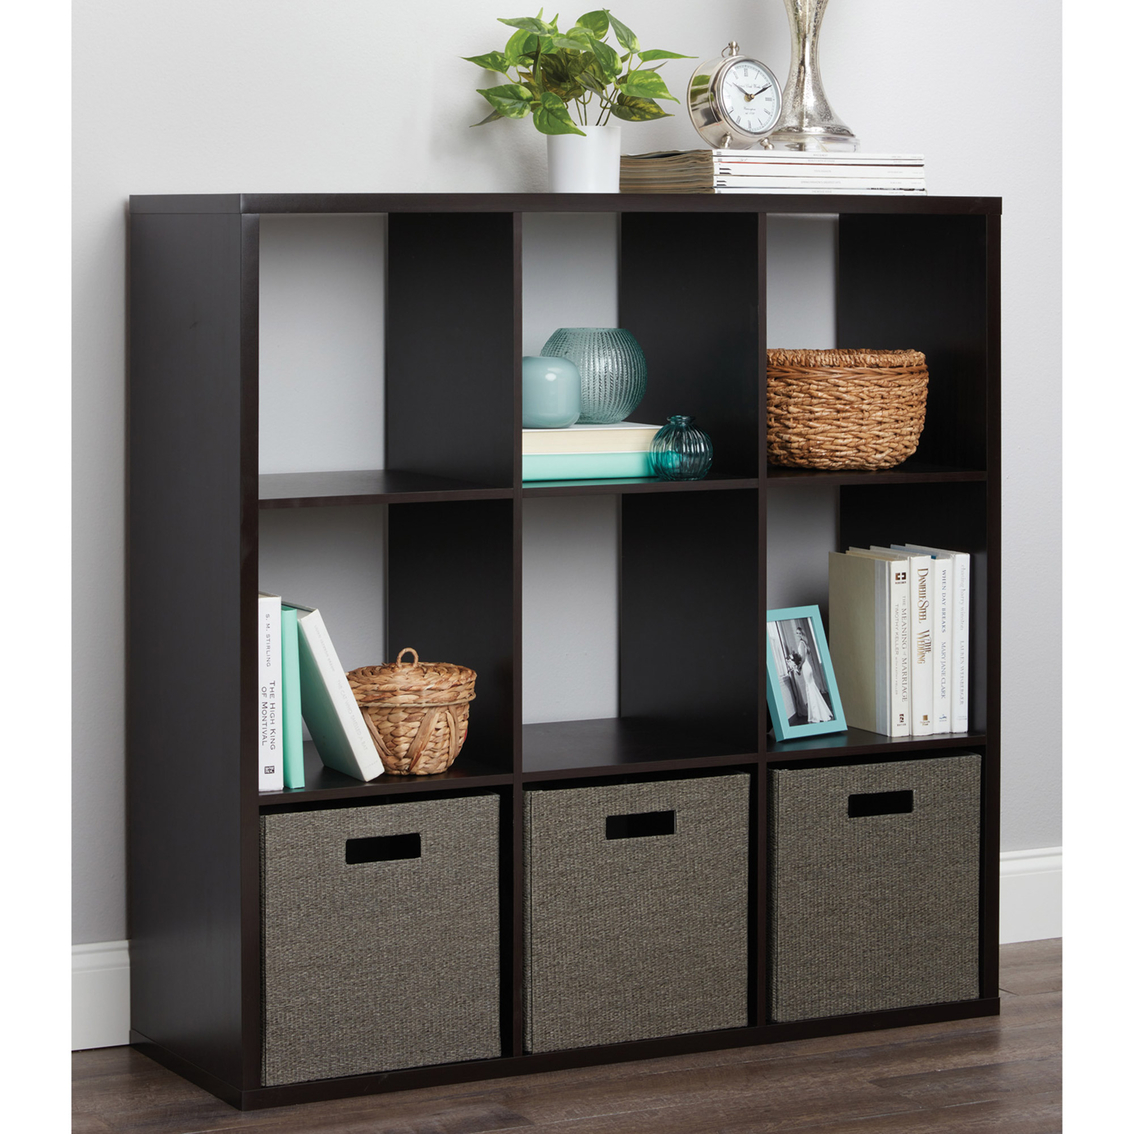 Simply Perfect 9 Cube Organizer Shelf 13 in. - Image 2 of 2